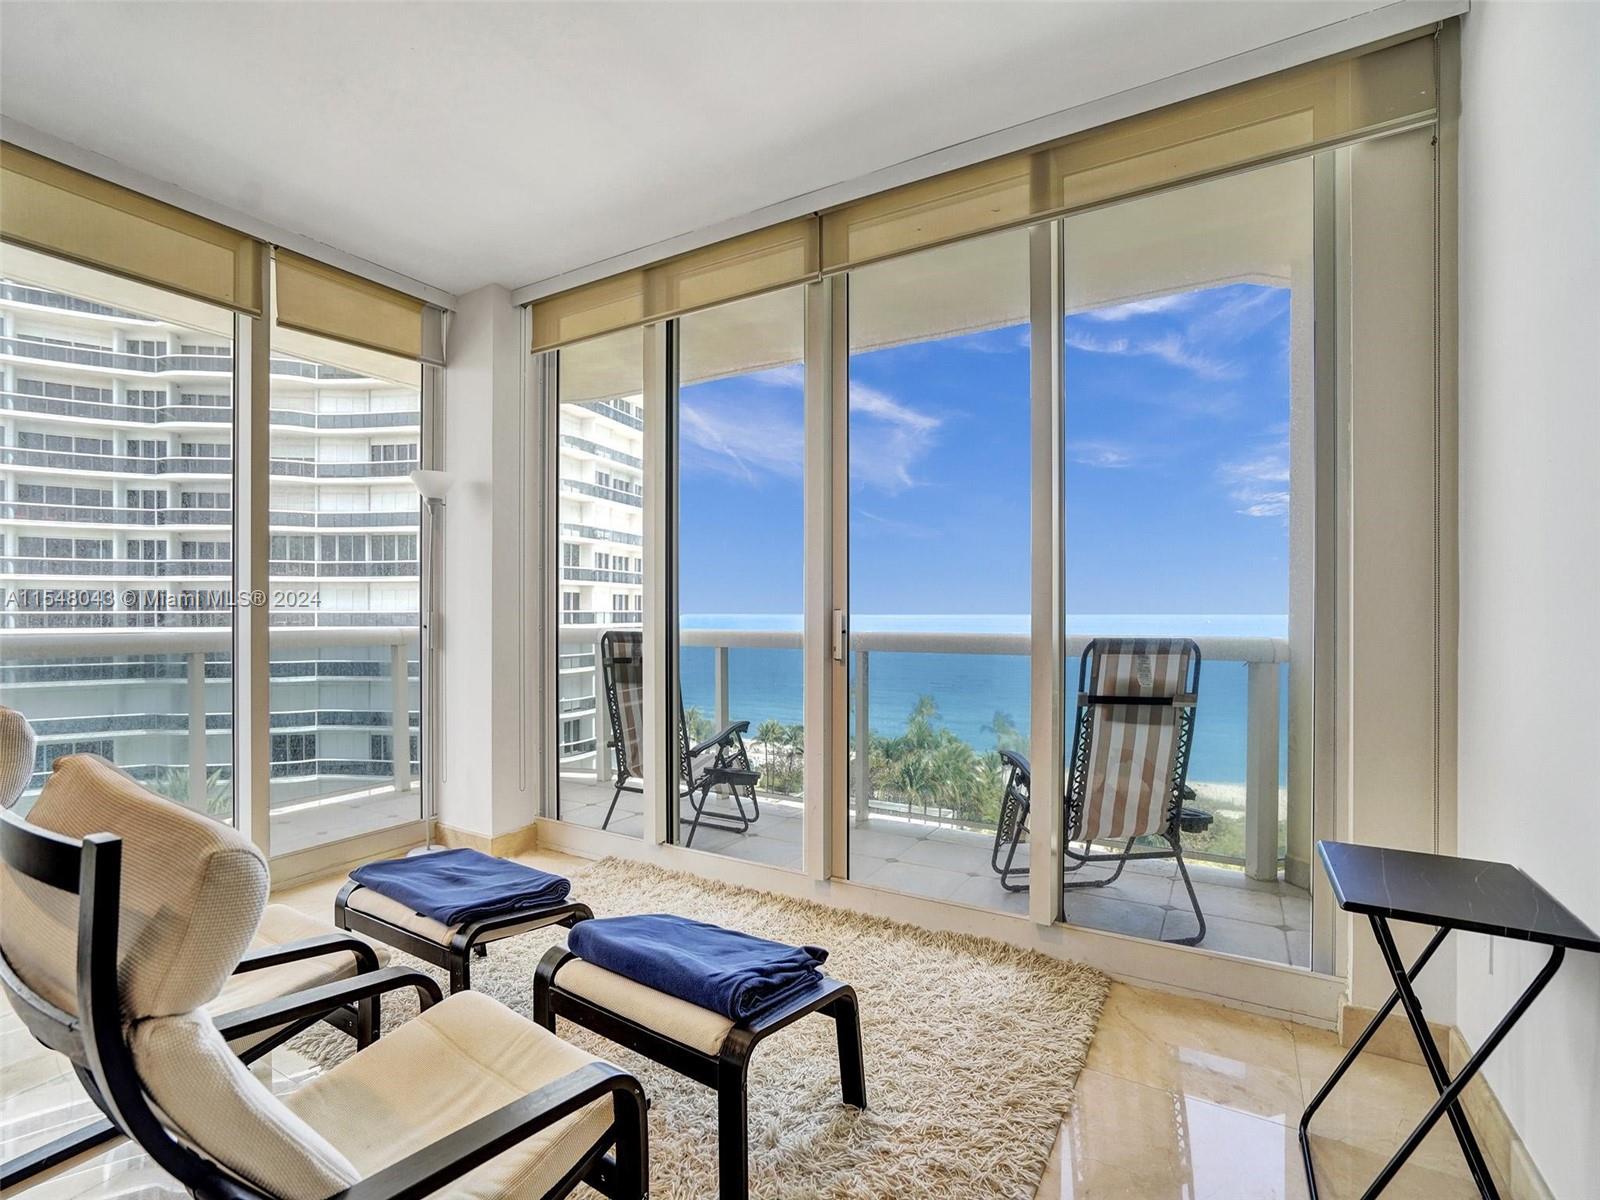 AMAZING CONDO WITH OCEAN VIEWS. FULLY FURNISHED 2 BEDROOMS 2-1/2 BATHS. MINIMUM RENTAL PERIOD IS 6 MONTHS. CLOSE TO RESTAURANTS, SHOPPING GROCERY STORES AND MORE. EASY TO SHOW.

REALTORS, PLEASE READ BROKER REMARKS!!!!!!